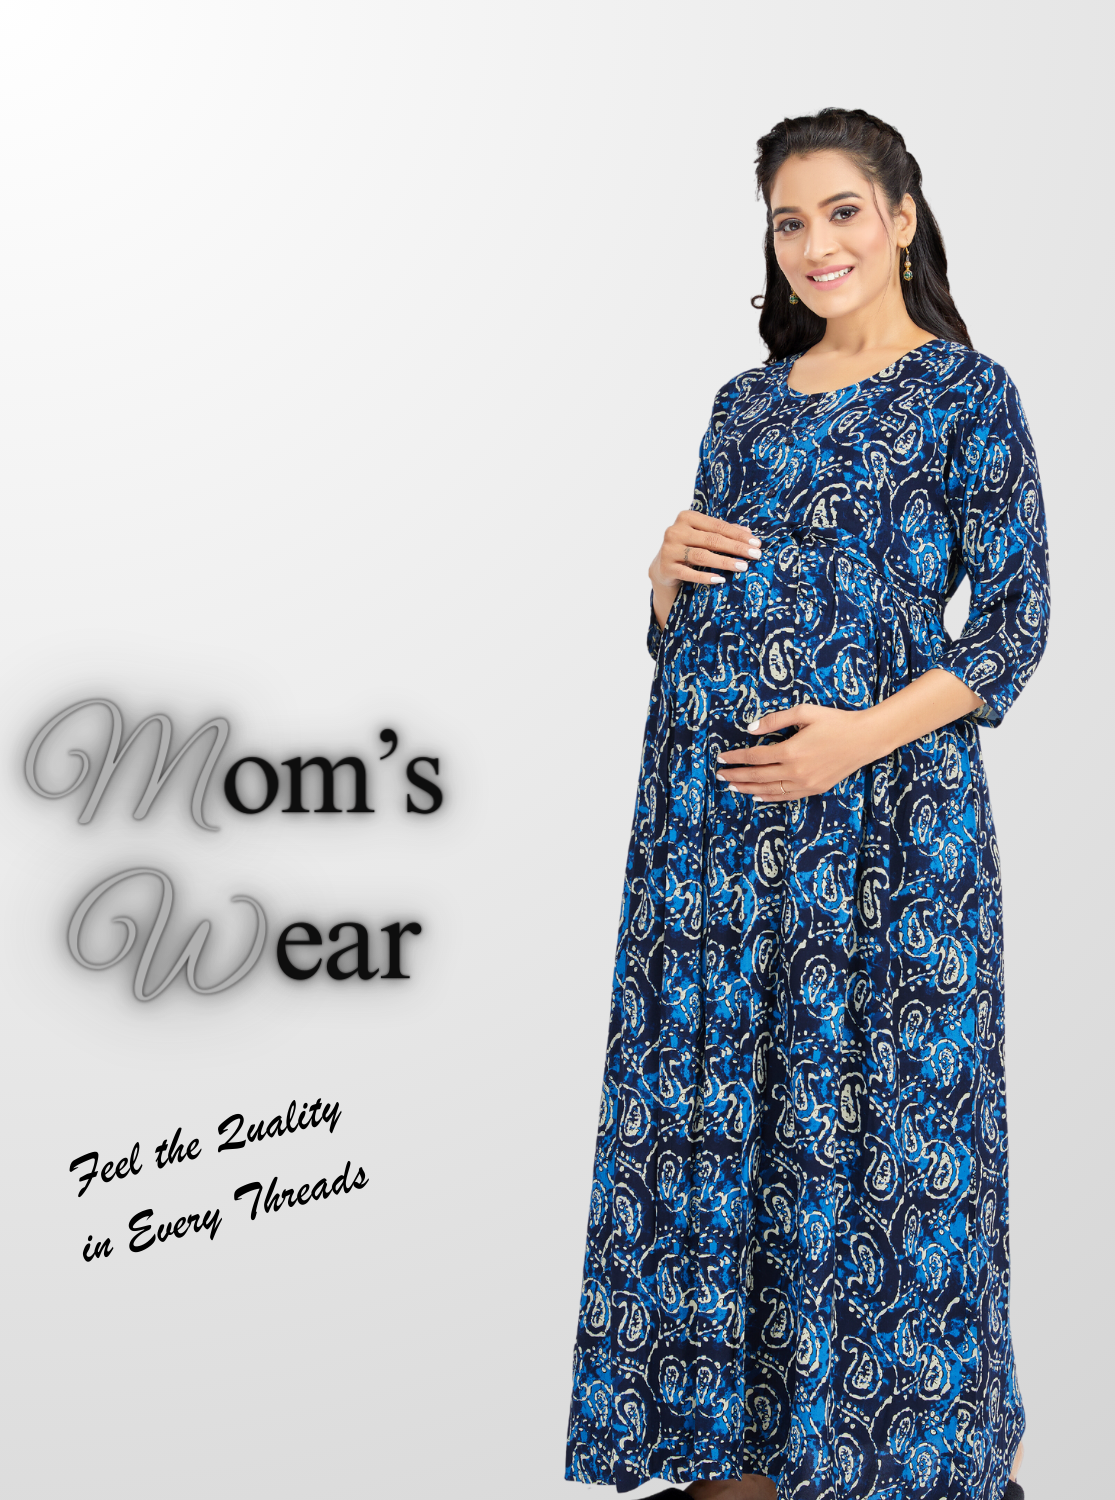 ONLY MINE 4-IN-ONE Mom's Wear - Soft & Smooth Rayon | Maternity | Feeding | Maxi | Long Frock | Casual Wear | Perfect Maternity Collection for Pregnancy Women's